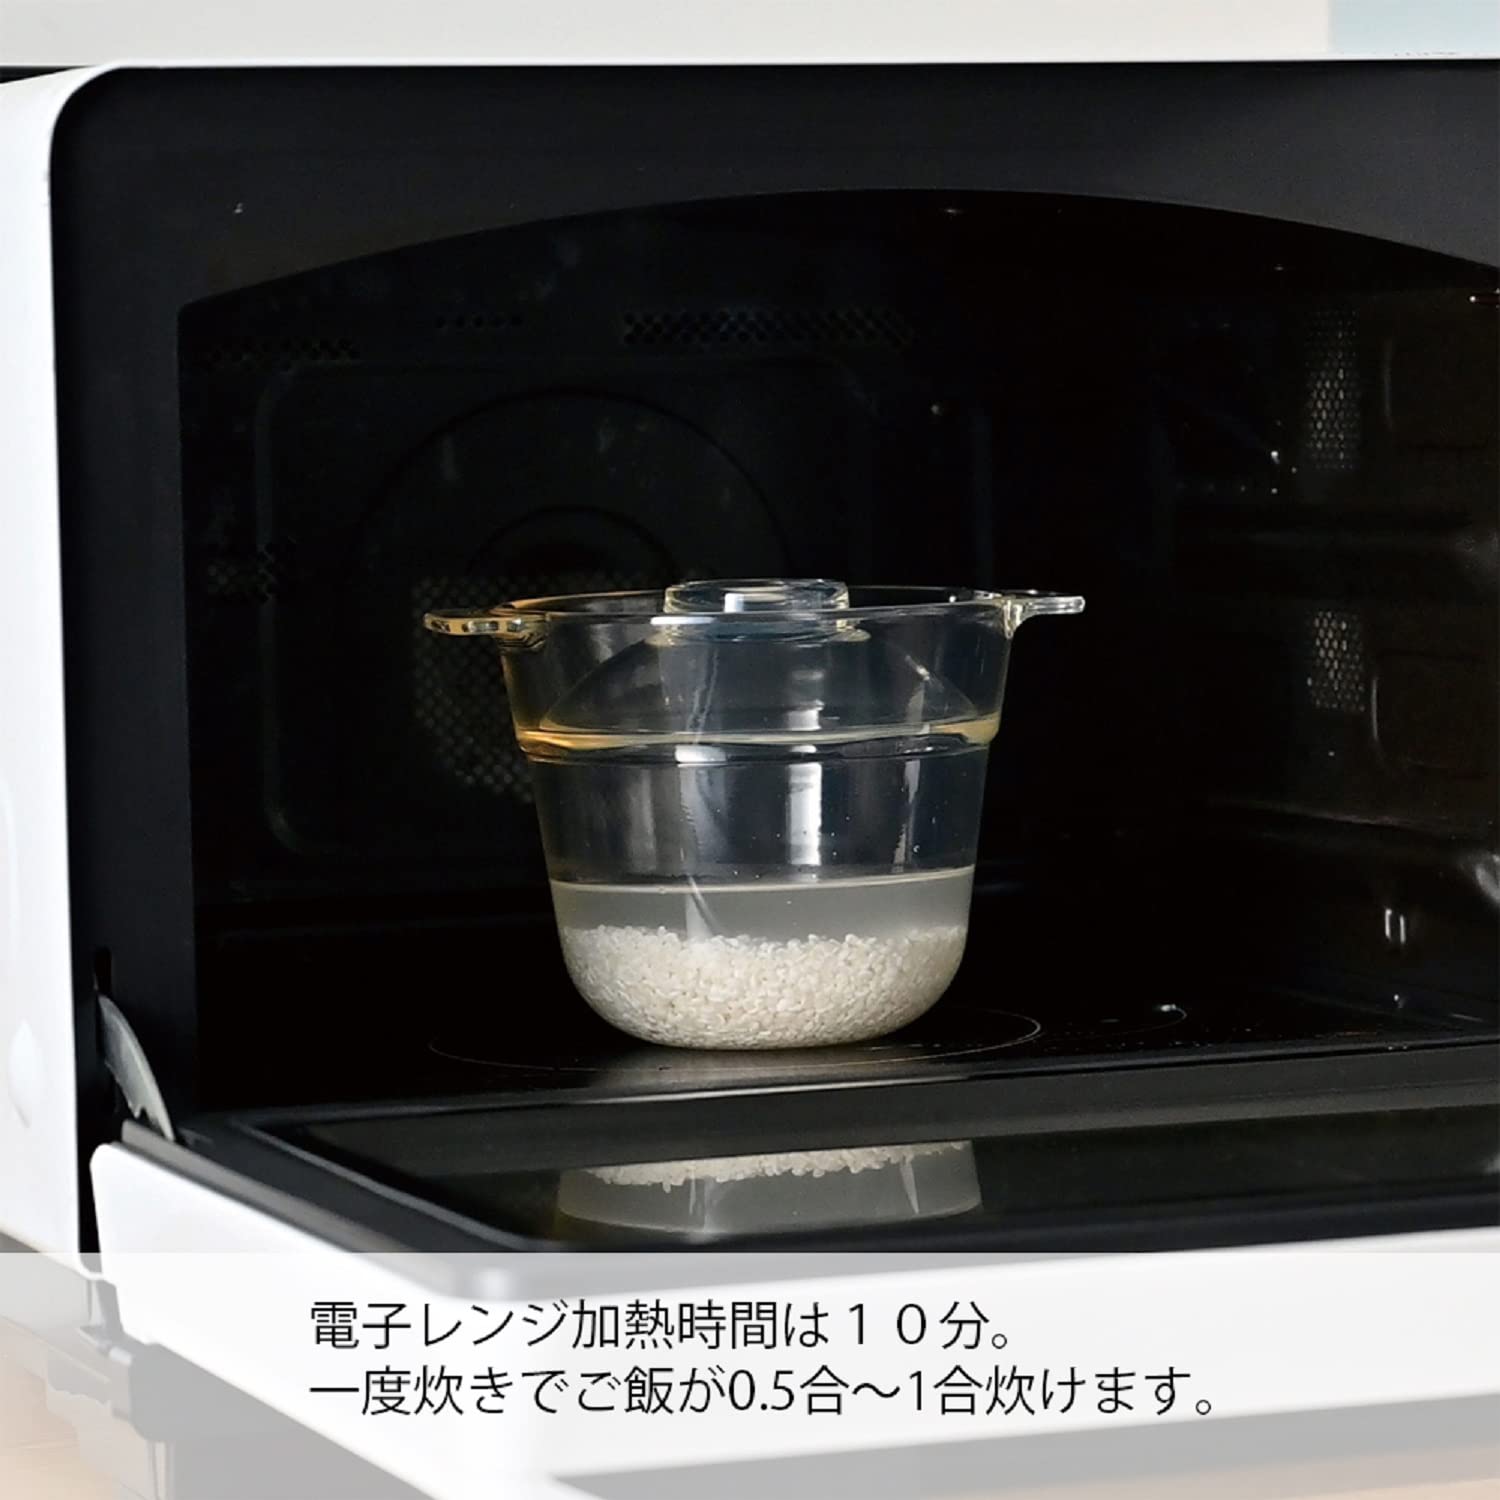 Hario XRCP-1 Heat-Resistant Microwave Cooker for 1 Person 10 Mins